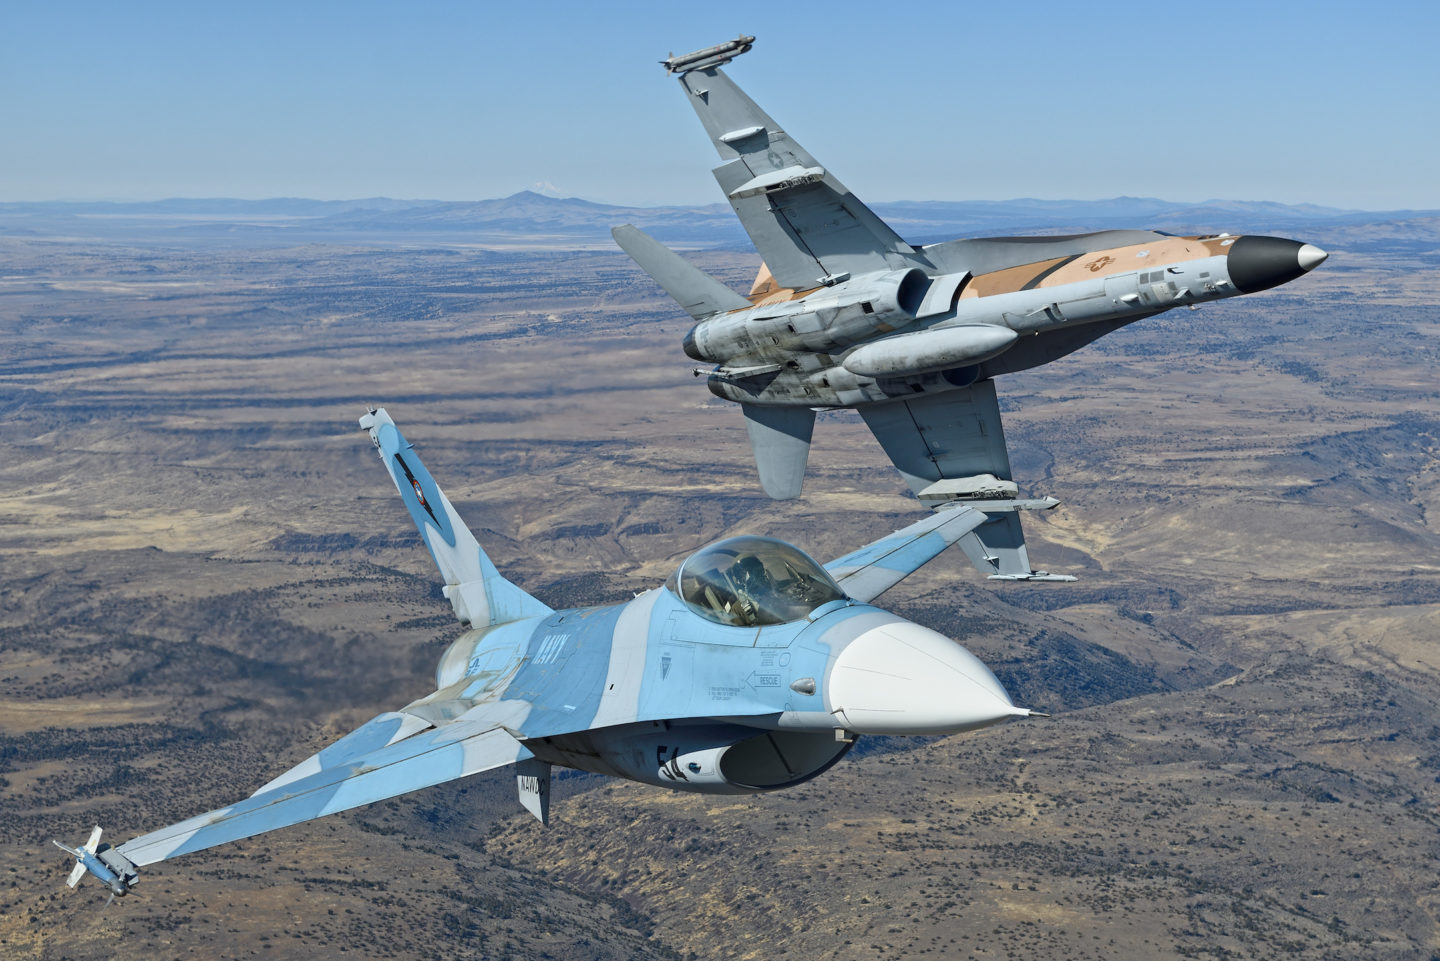 Canada’s new TOPGUN reaches the pinnacle of fighter aviation - Skies Mag